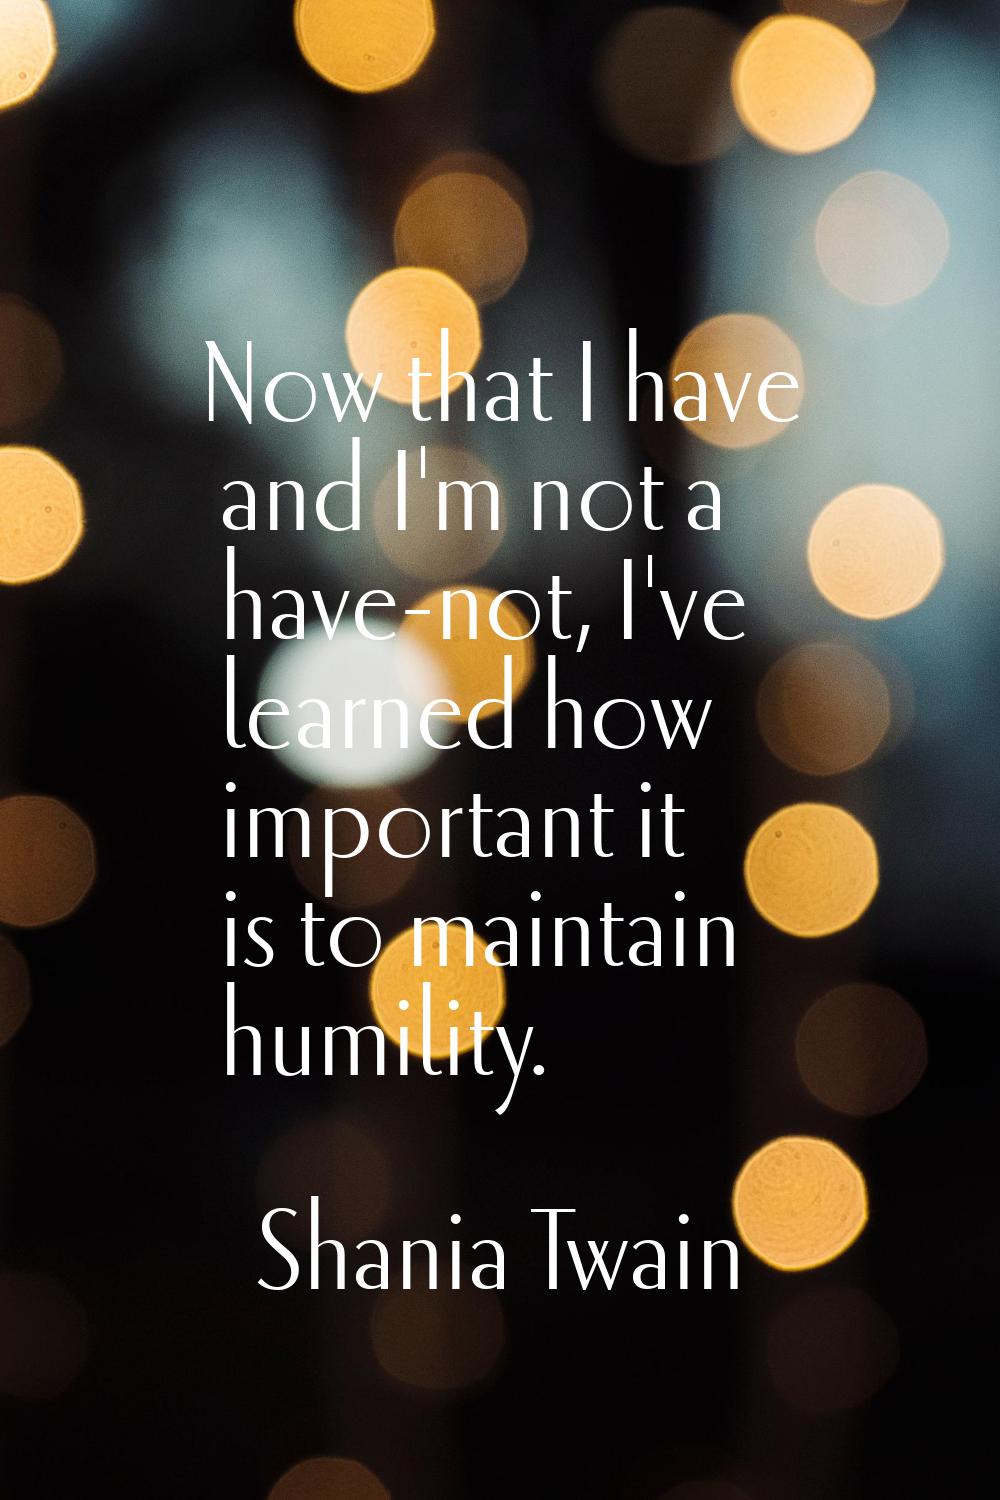 Now that I have and I'm not a have-not, I've learned how important it is to maintain humility.